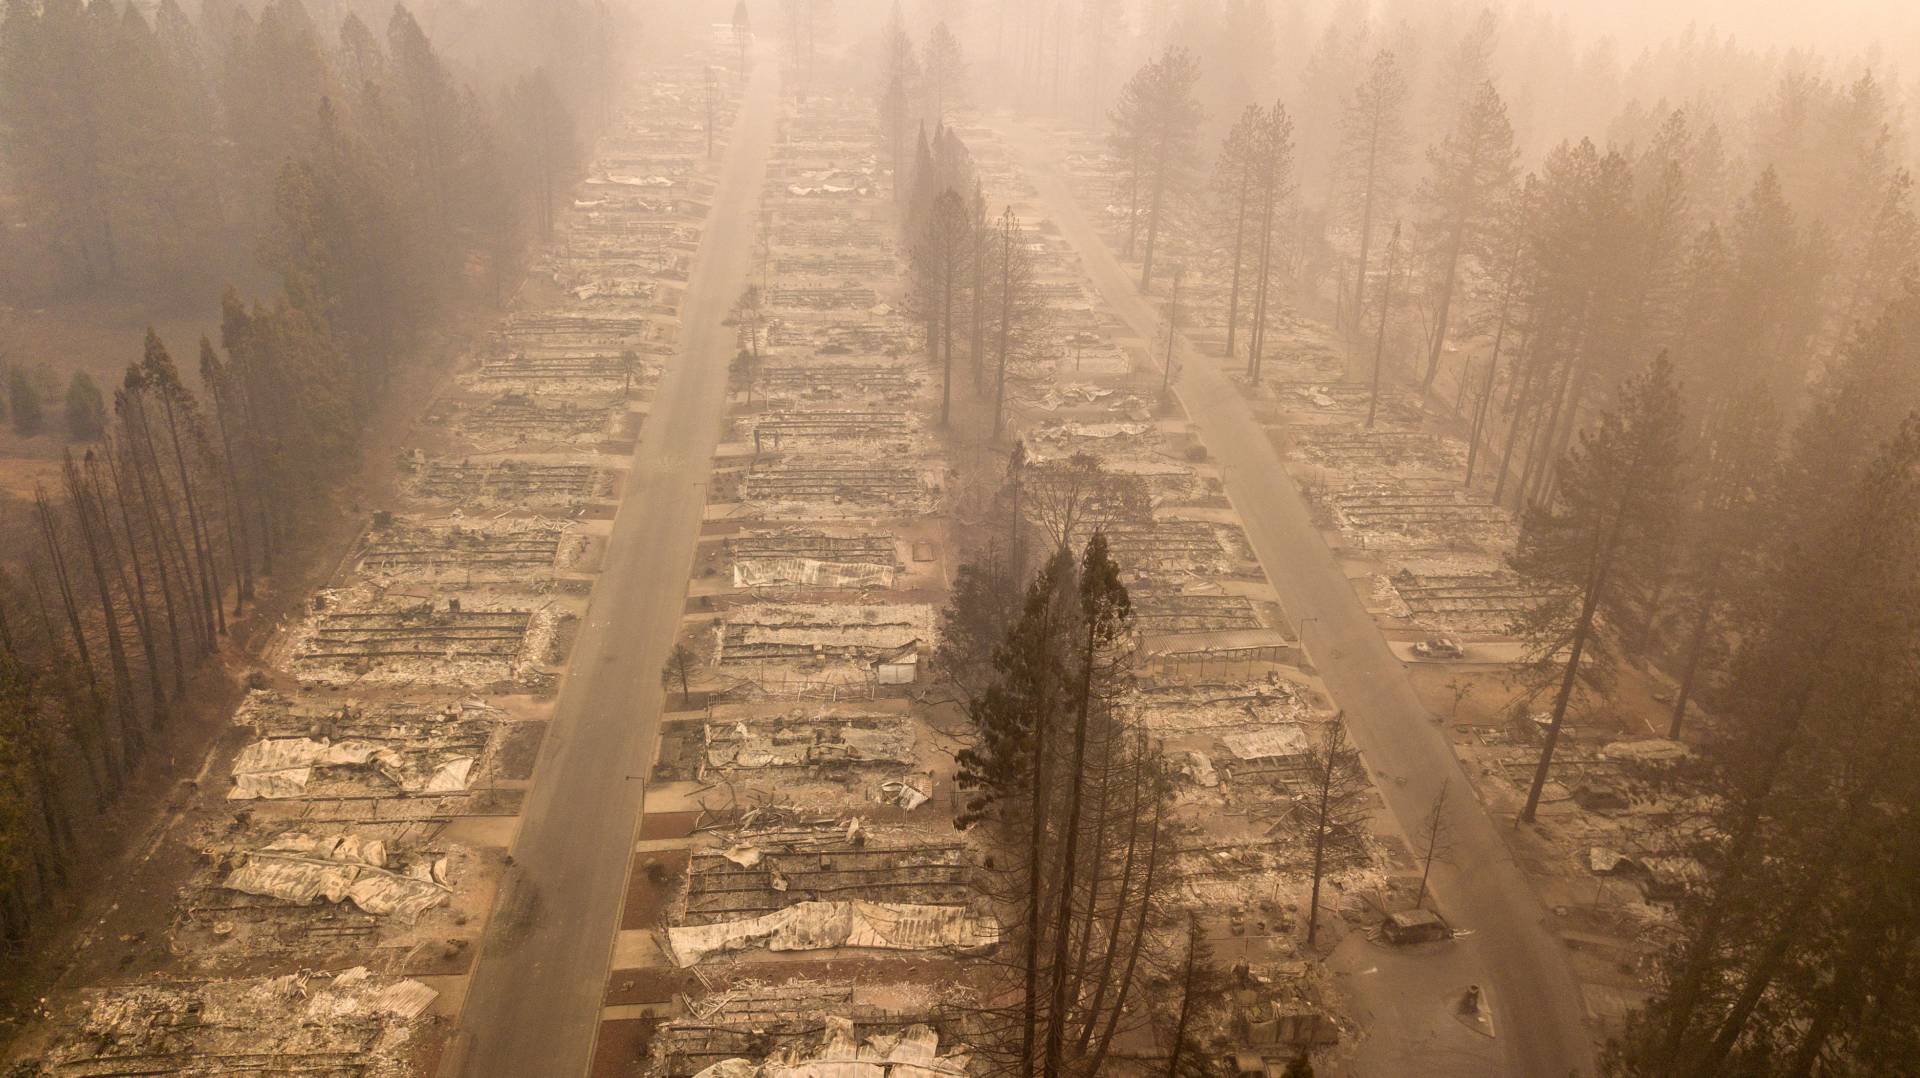 The Camp Fire consumed entire neighborhoods in Paradise, California. A massive federal report says climate change is contributing to larger wildfires as well as other deadly extreme weather. JOSH EDELSON/AFP/Getty Images